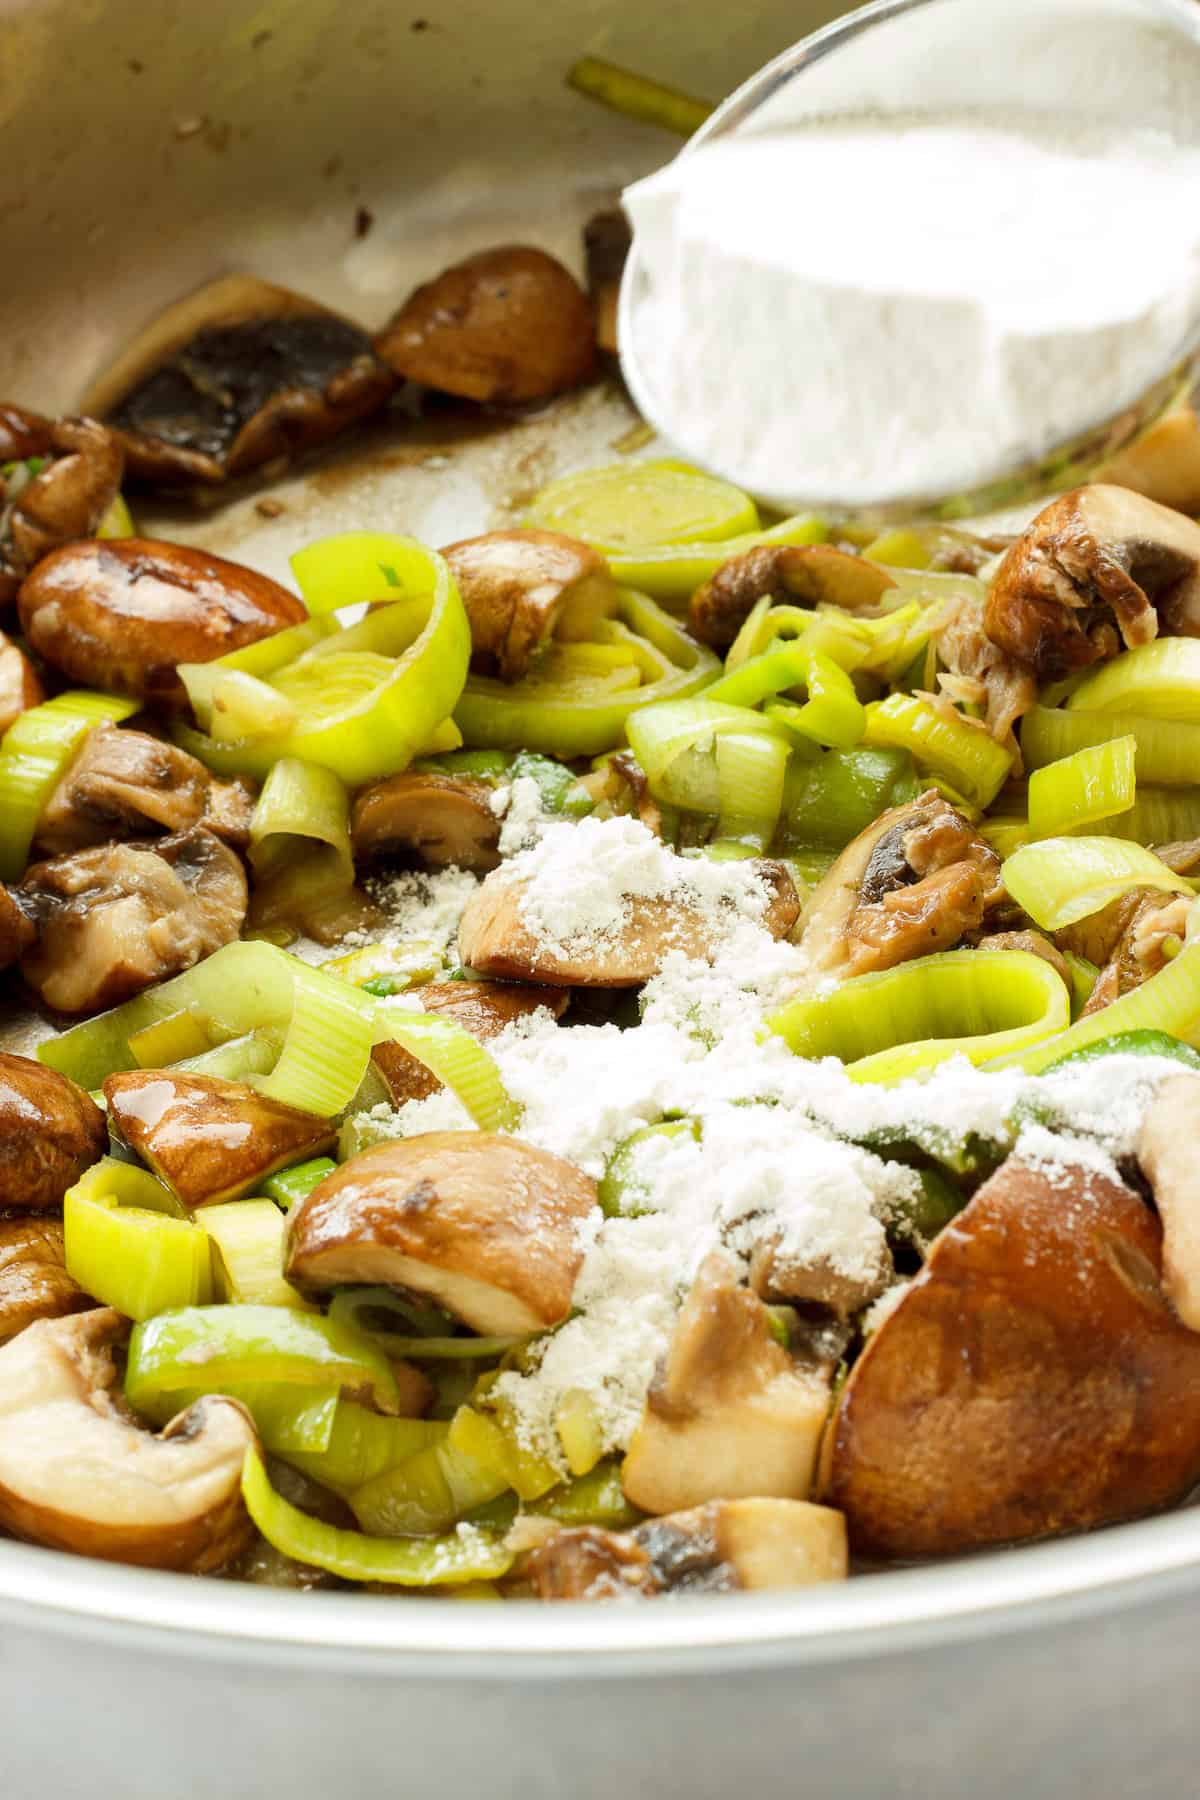 Instructions to make chicken with spinach and mushrooms. A spoon of flour sprinkled over cooked leeks and mushrooms in a saute pan.